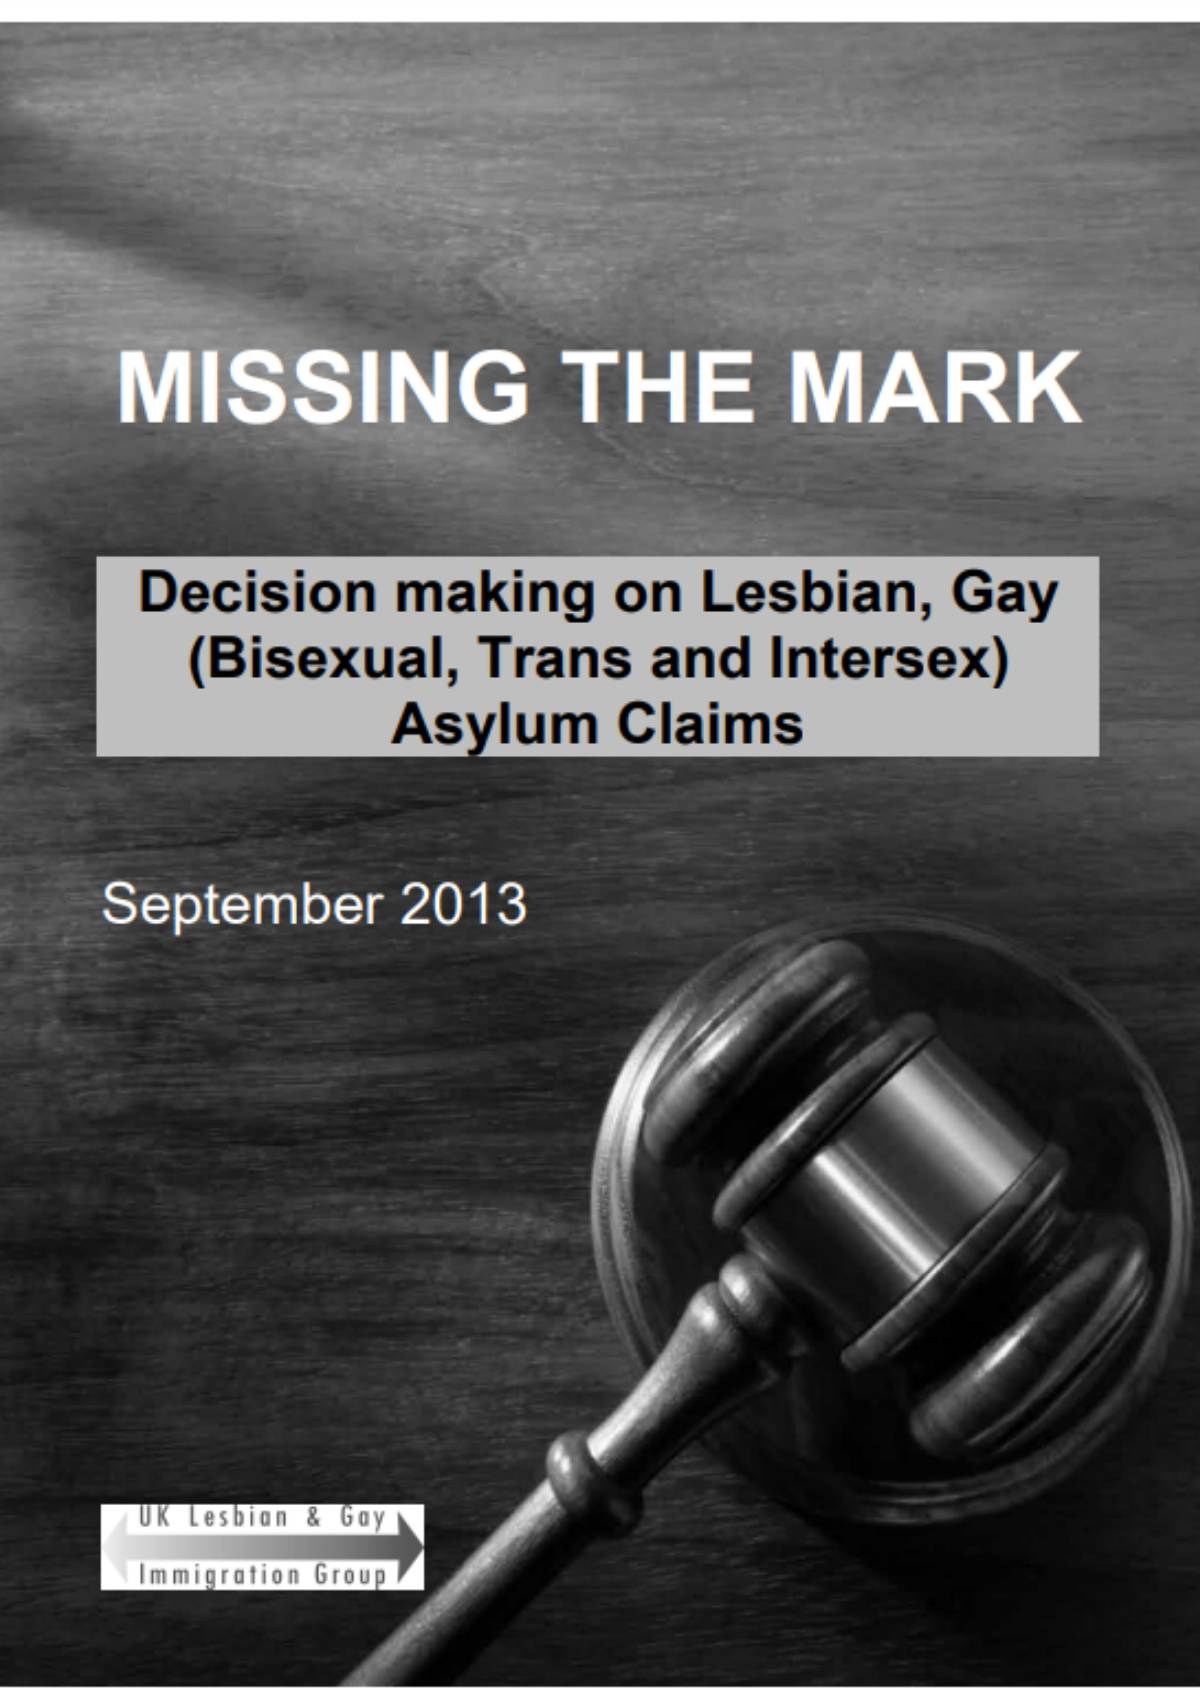 Missing the mark decision making on lesbian, gay, bisexual, transgender and intersex.